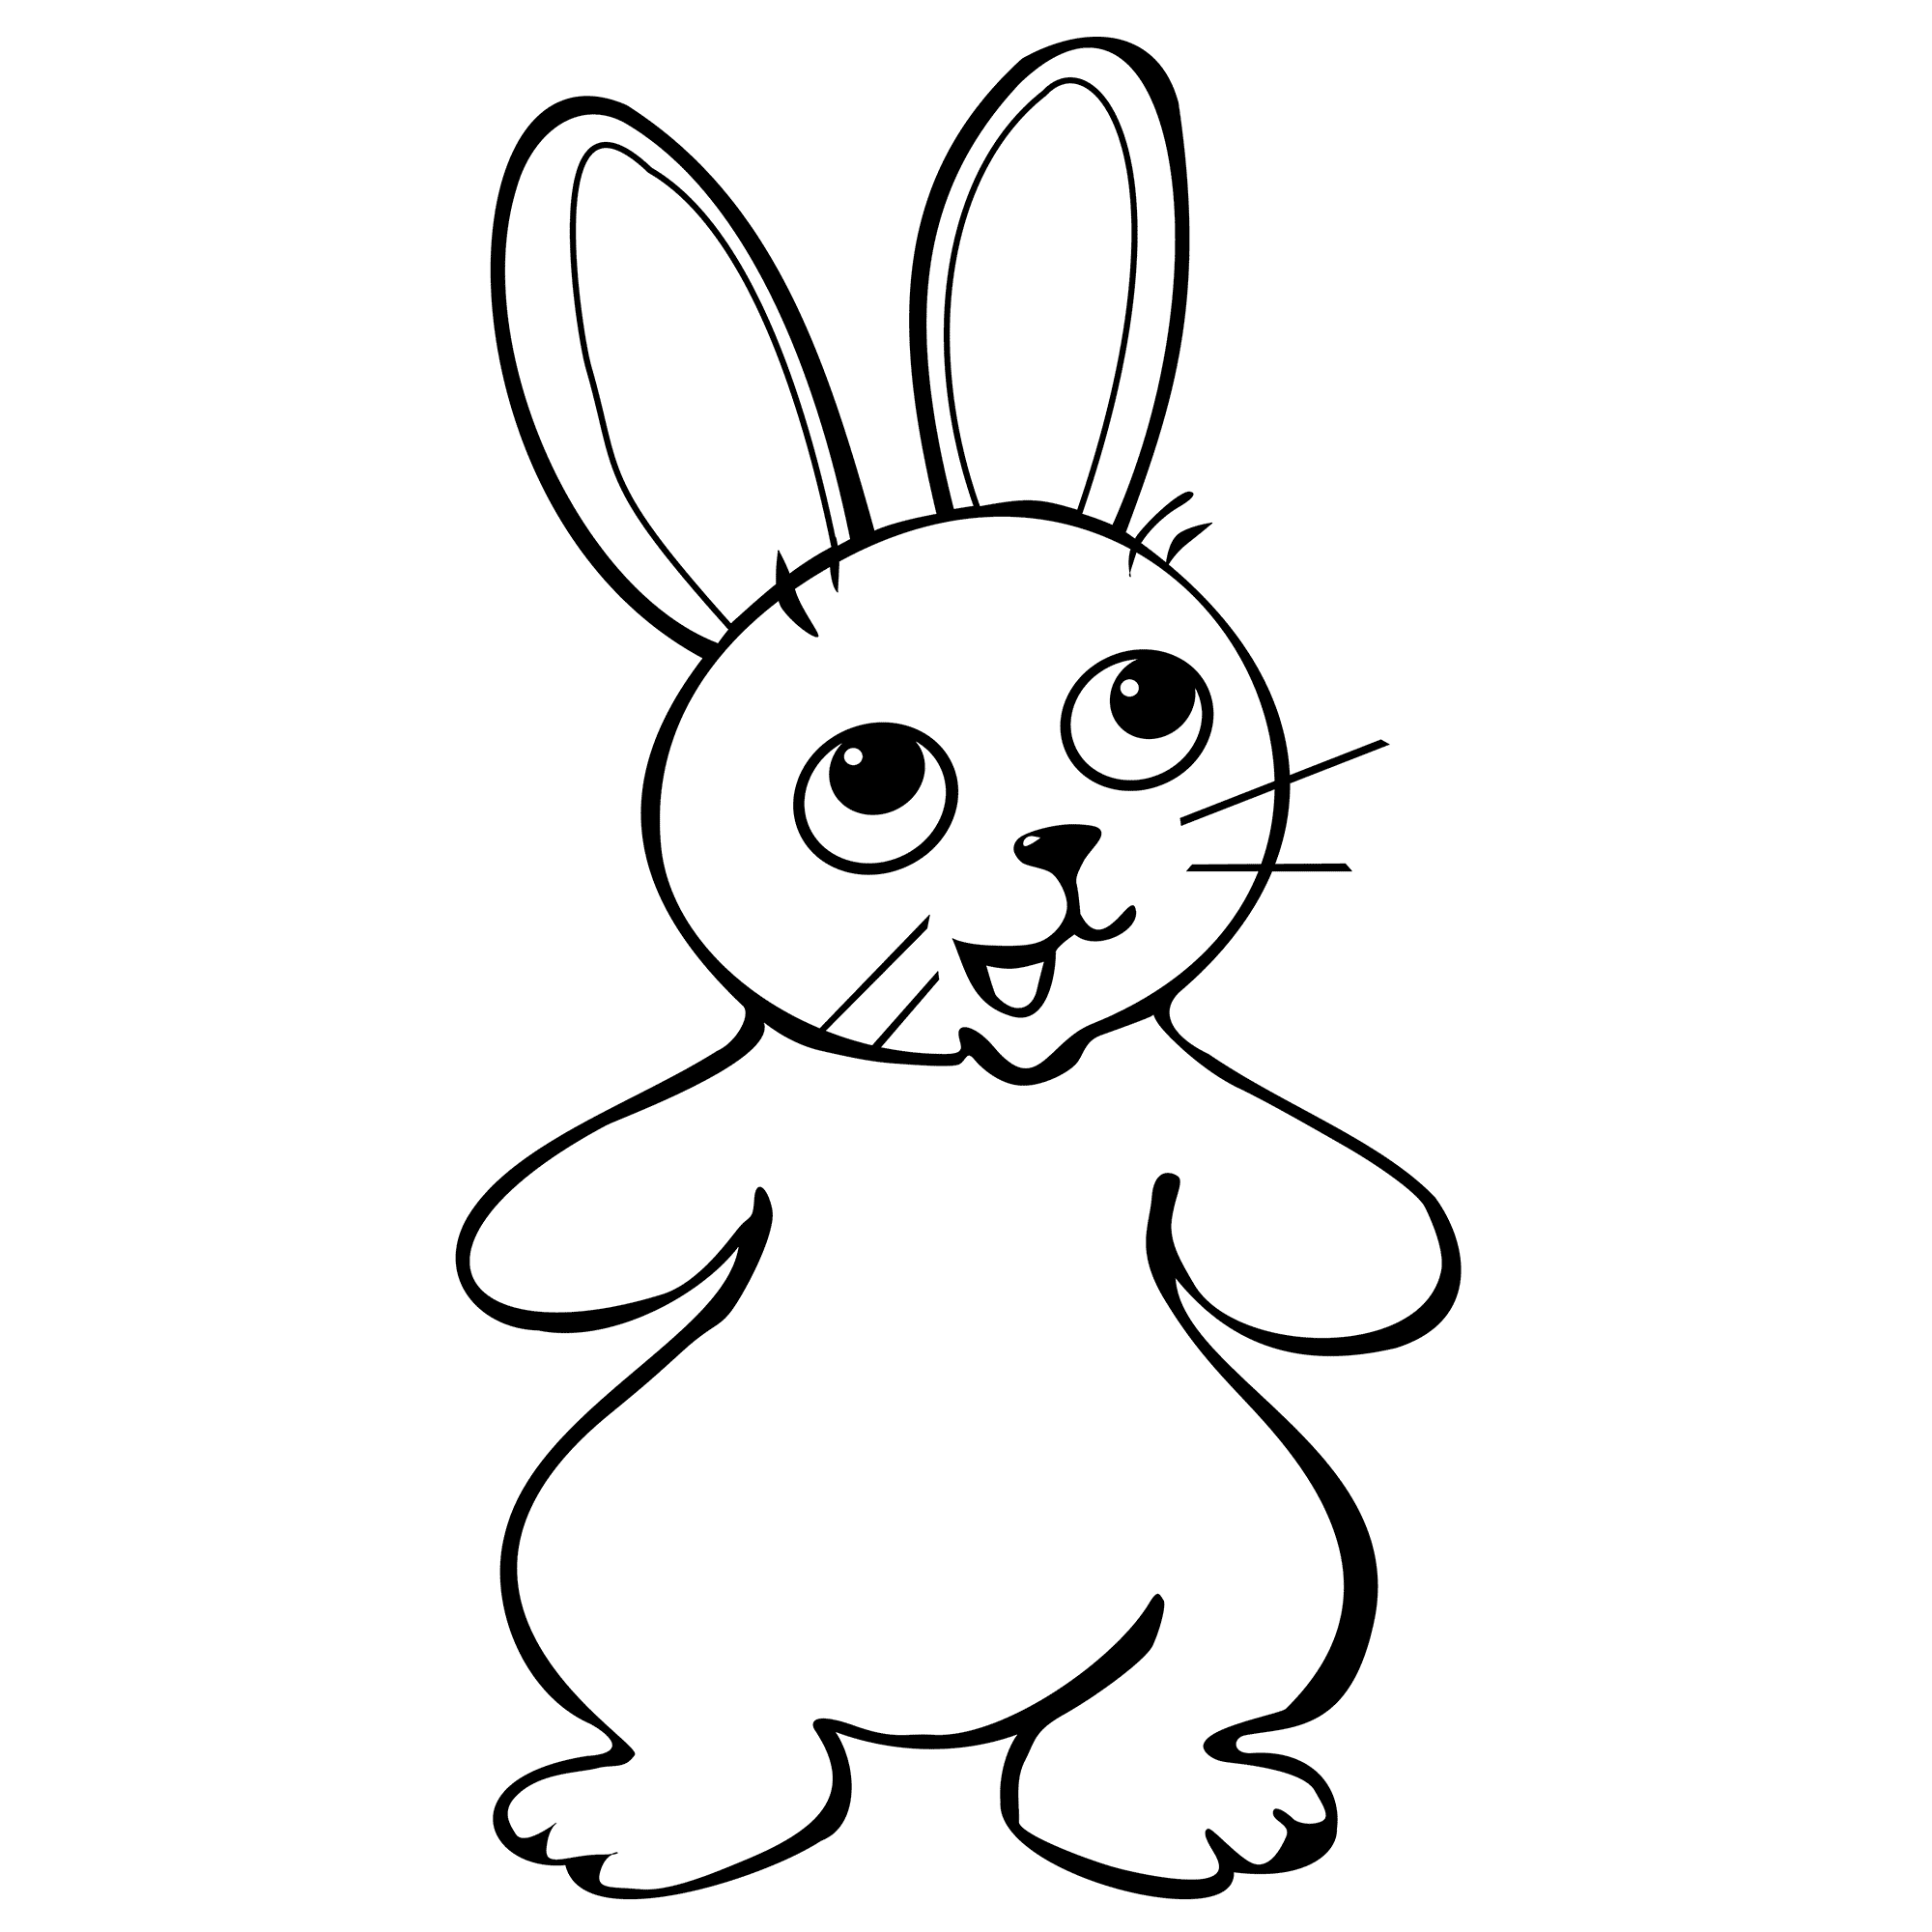 Easter Bunny Coloring Page - Whataboutmimi.com